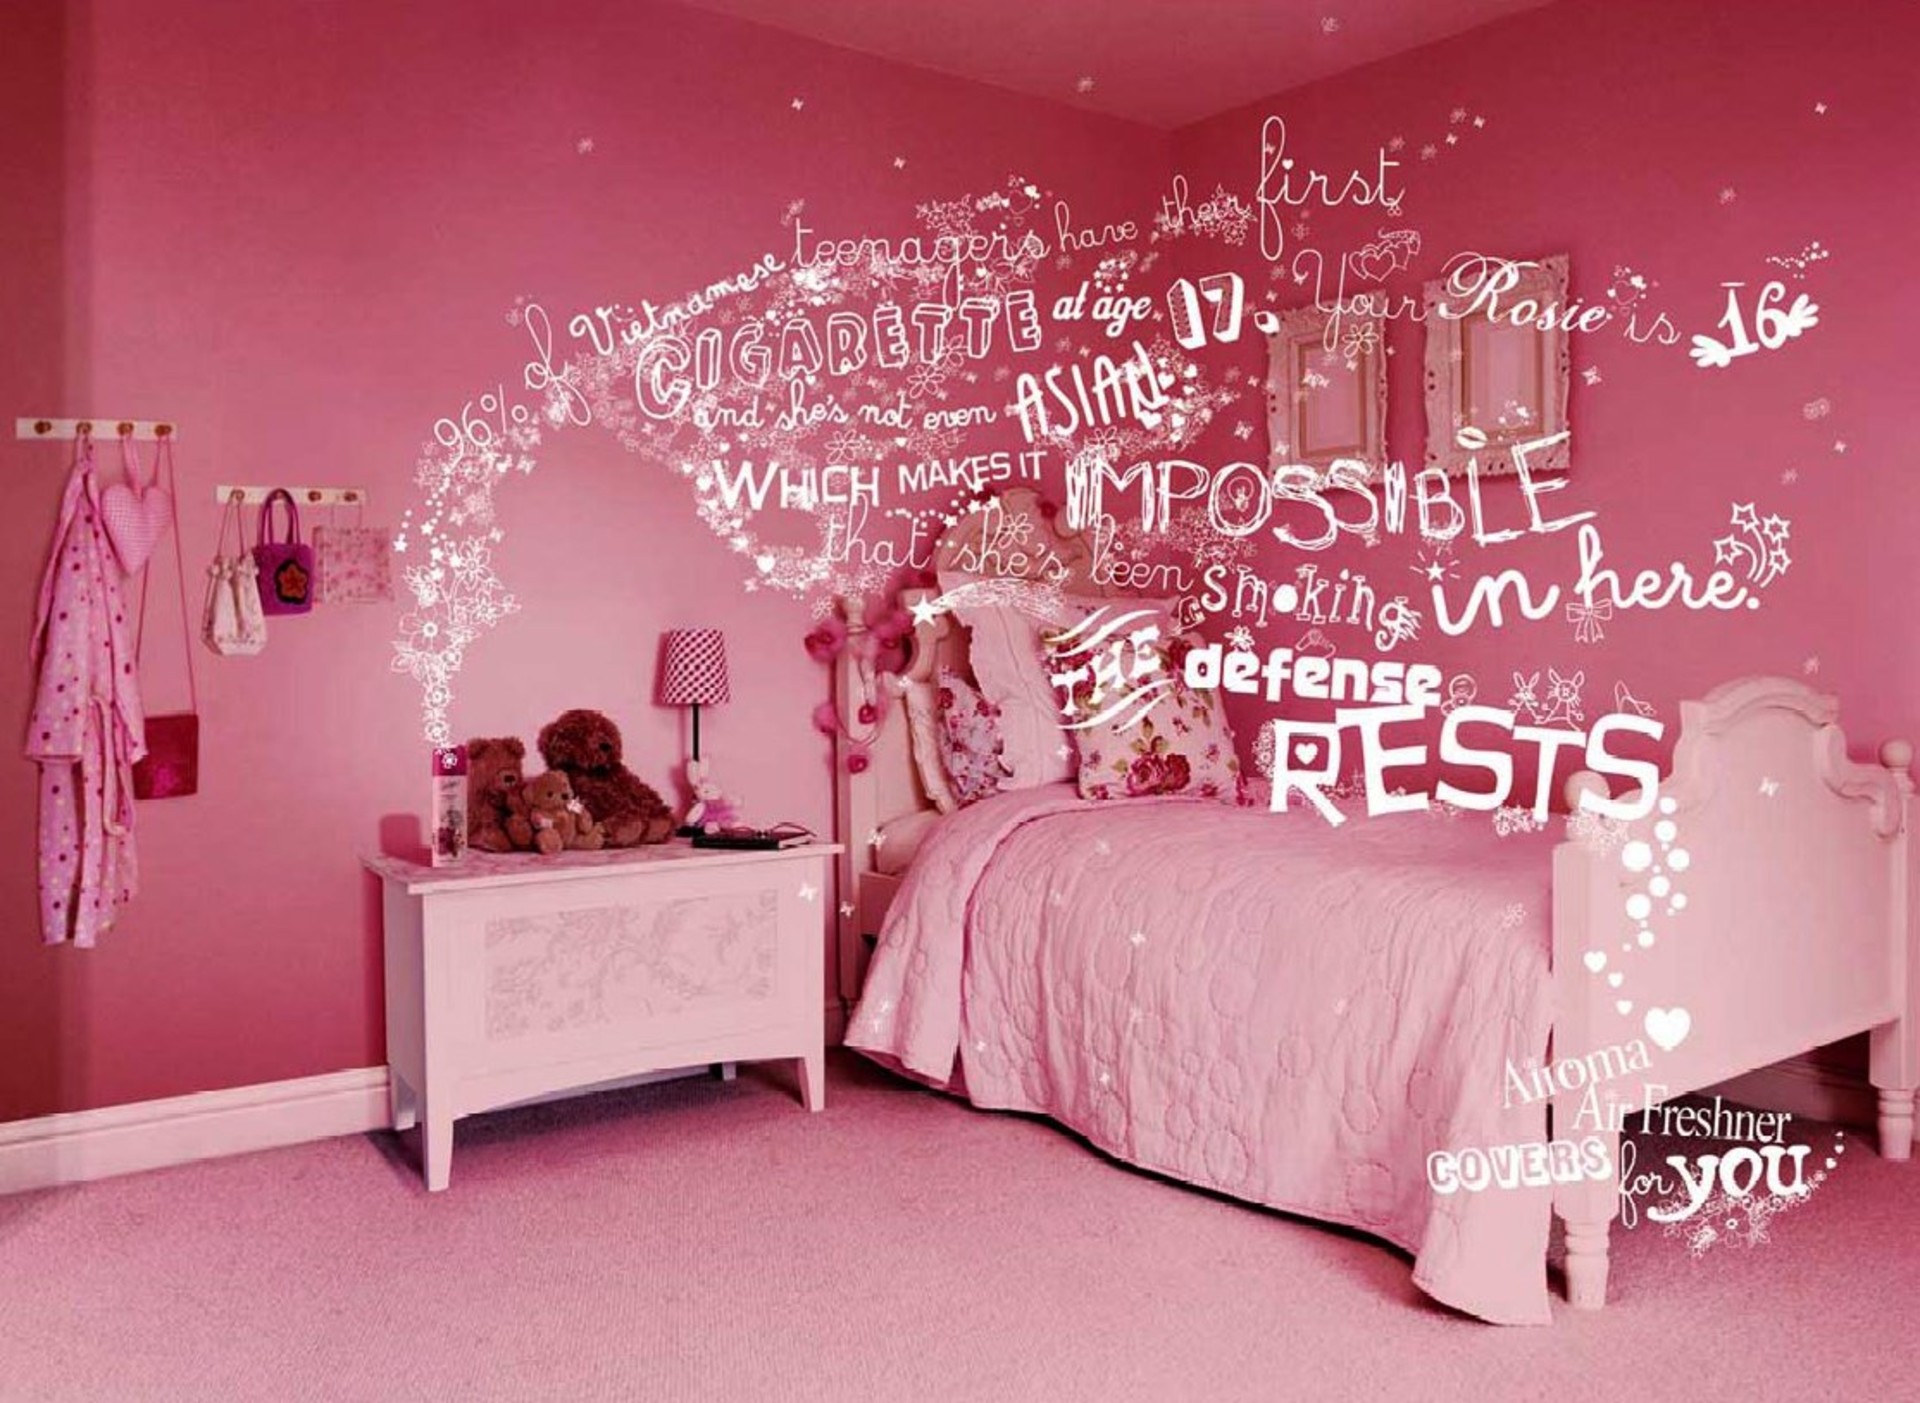 1920x1403 Girls Bedroom Color Schemes Pictures Options Ideas Home Room From Girl  Wallpaper Wonderful Bedrooms Polyvore For ...